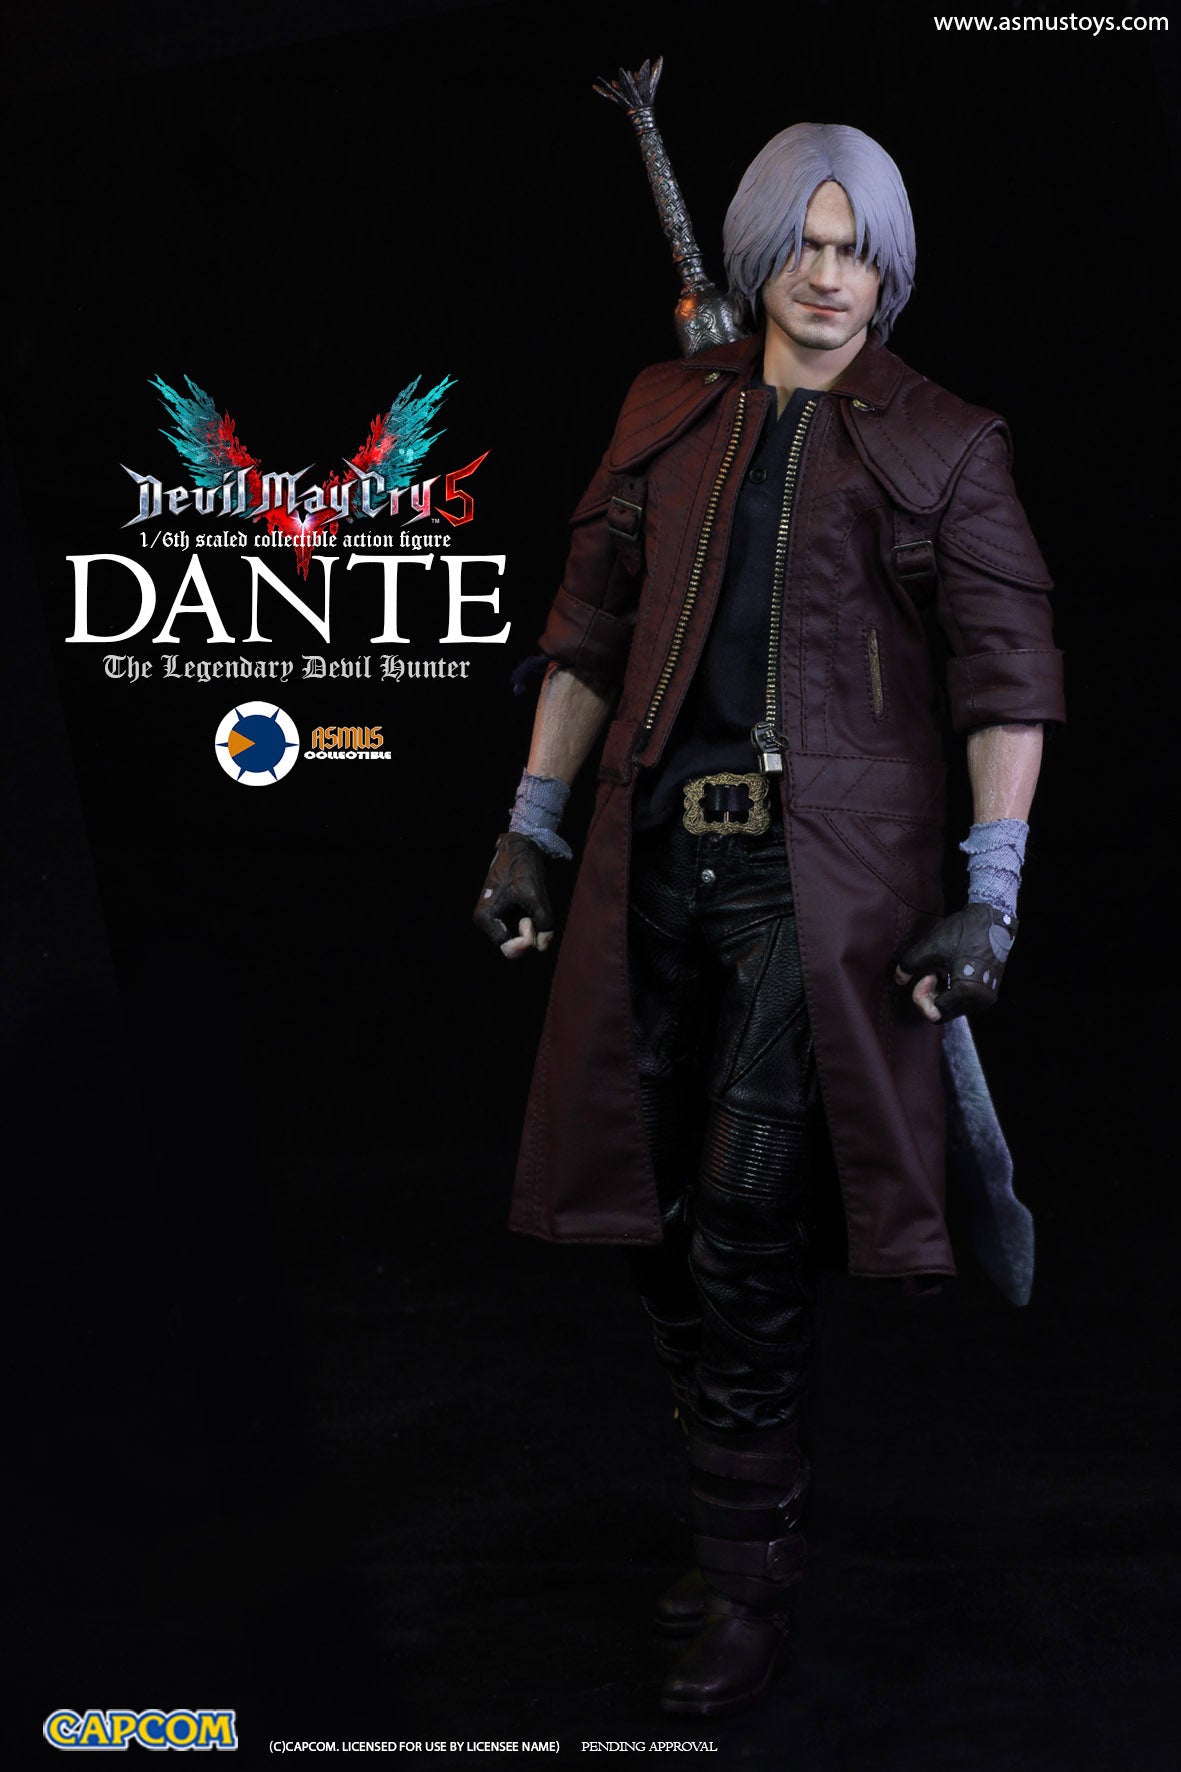 Asmus Toys - Devil May Cry 5 - Dante (Luxury Edition)